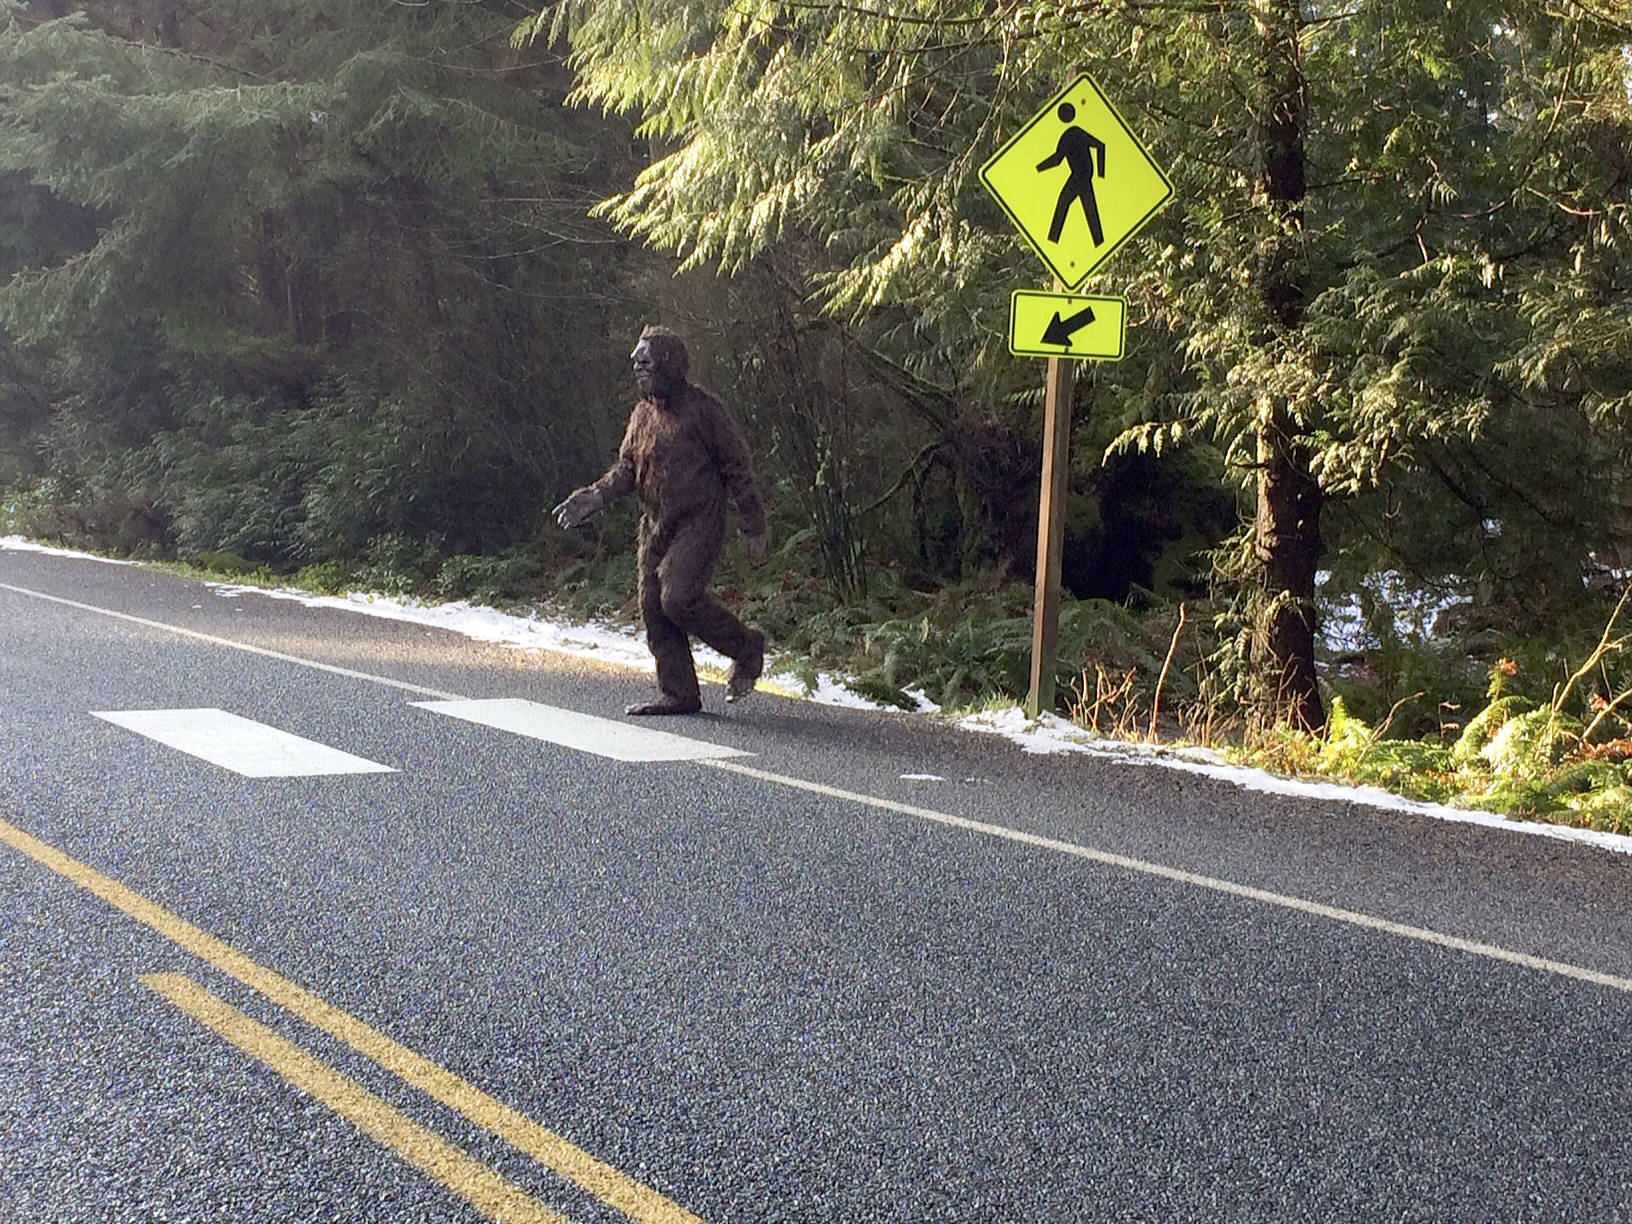 This Bigfoot-looking creature coming out of South Whidbey State Park was spotted by Maribeth Crandell of Island Transit Wednesday. The hairy being looked both ways and then used the crosswalk, she said.